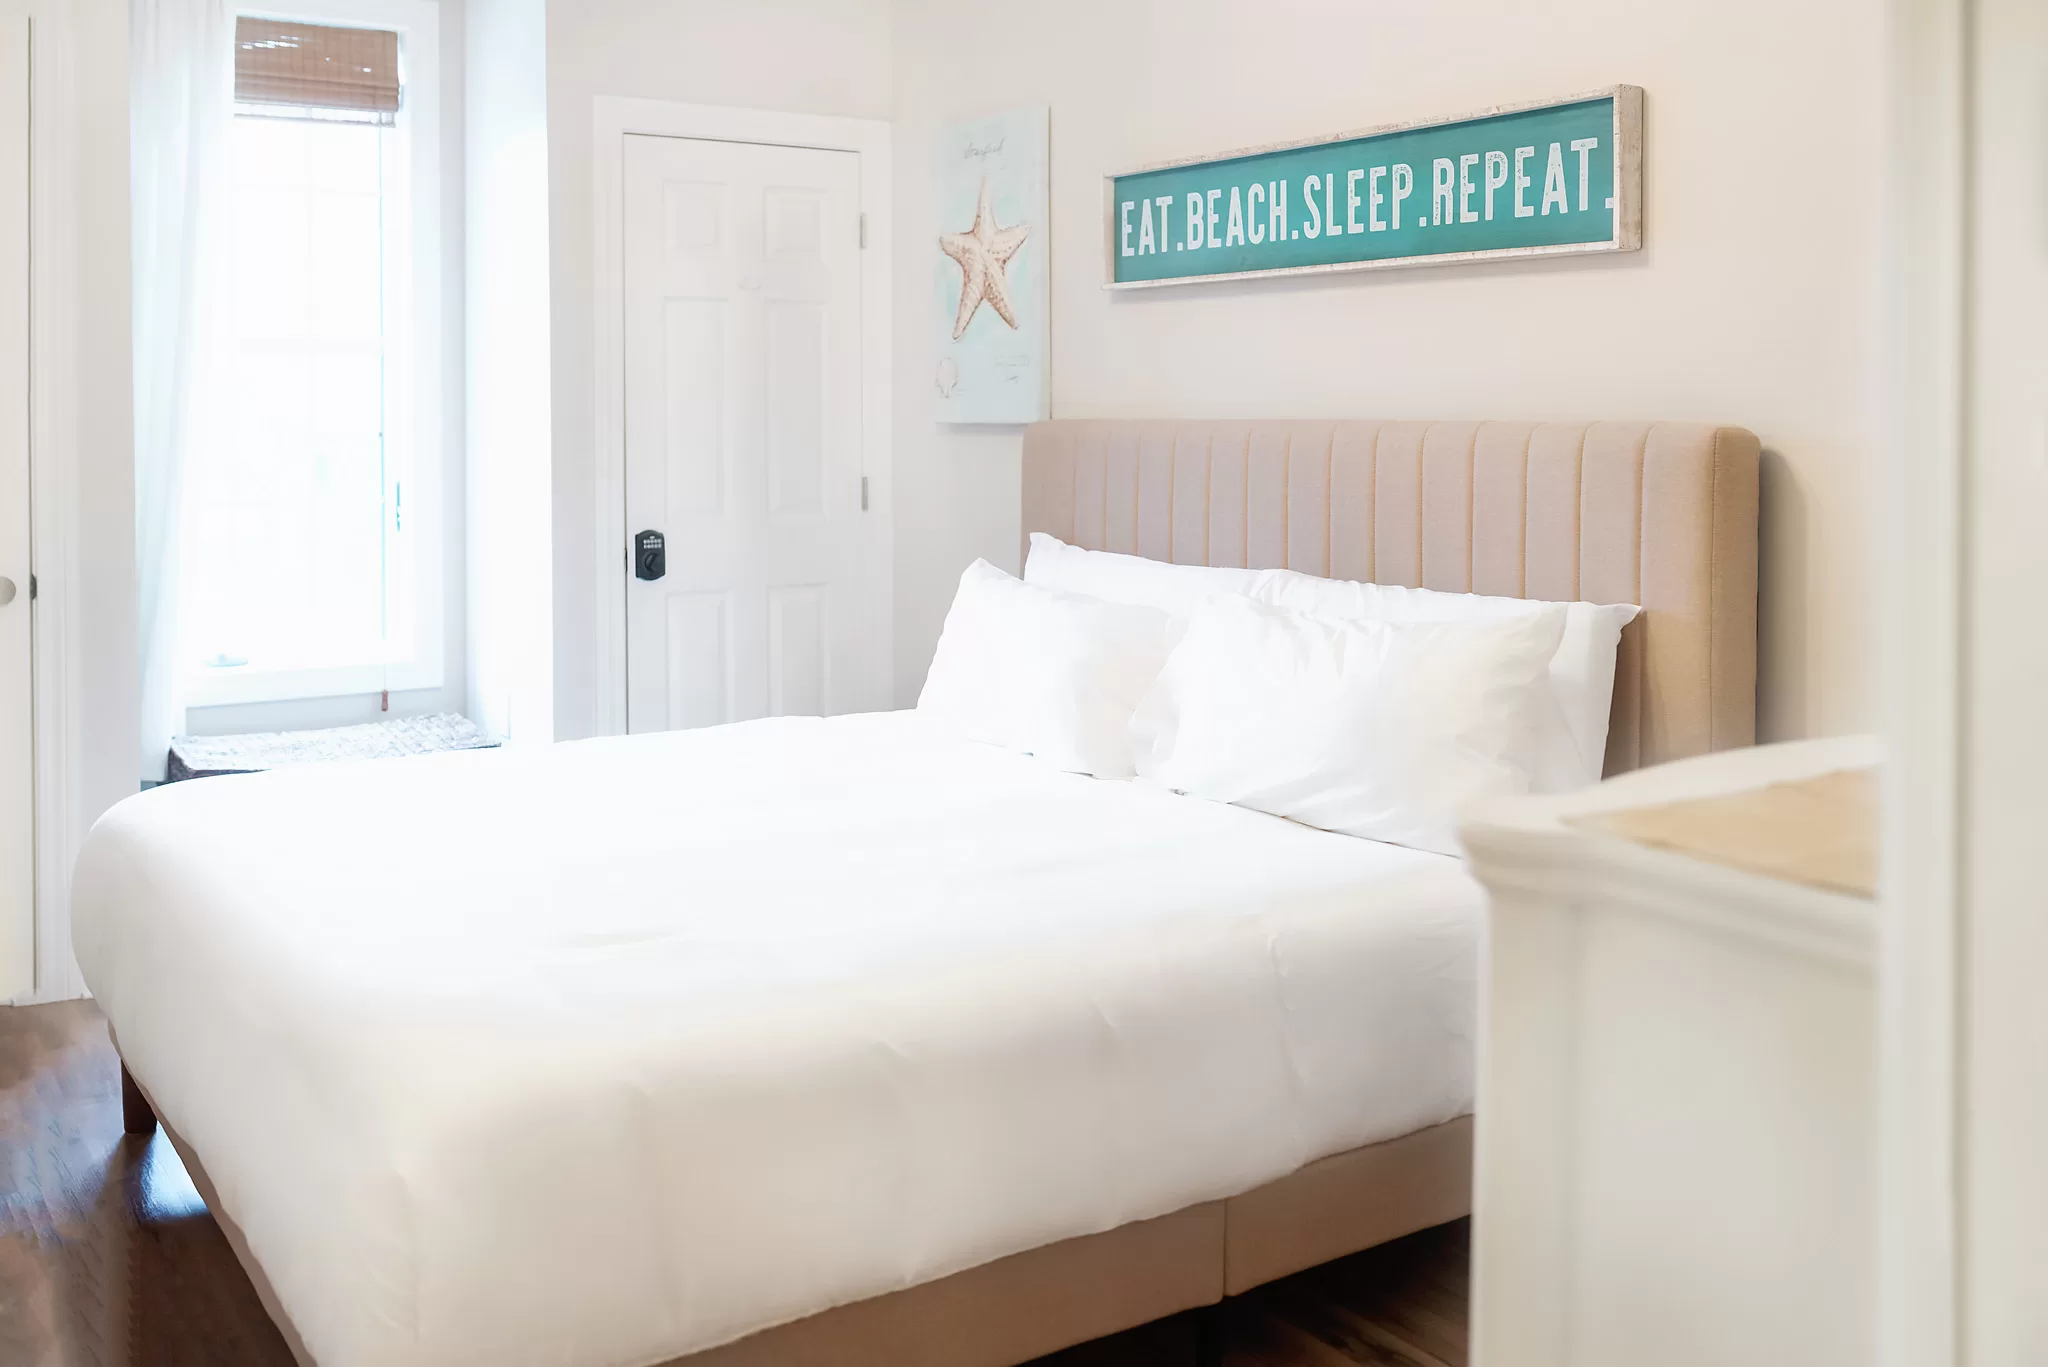 Best Best size for Airbnb Blog Post. This photo shows a king bed in a condo bedroom.